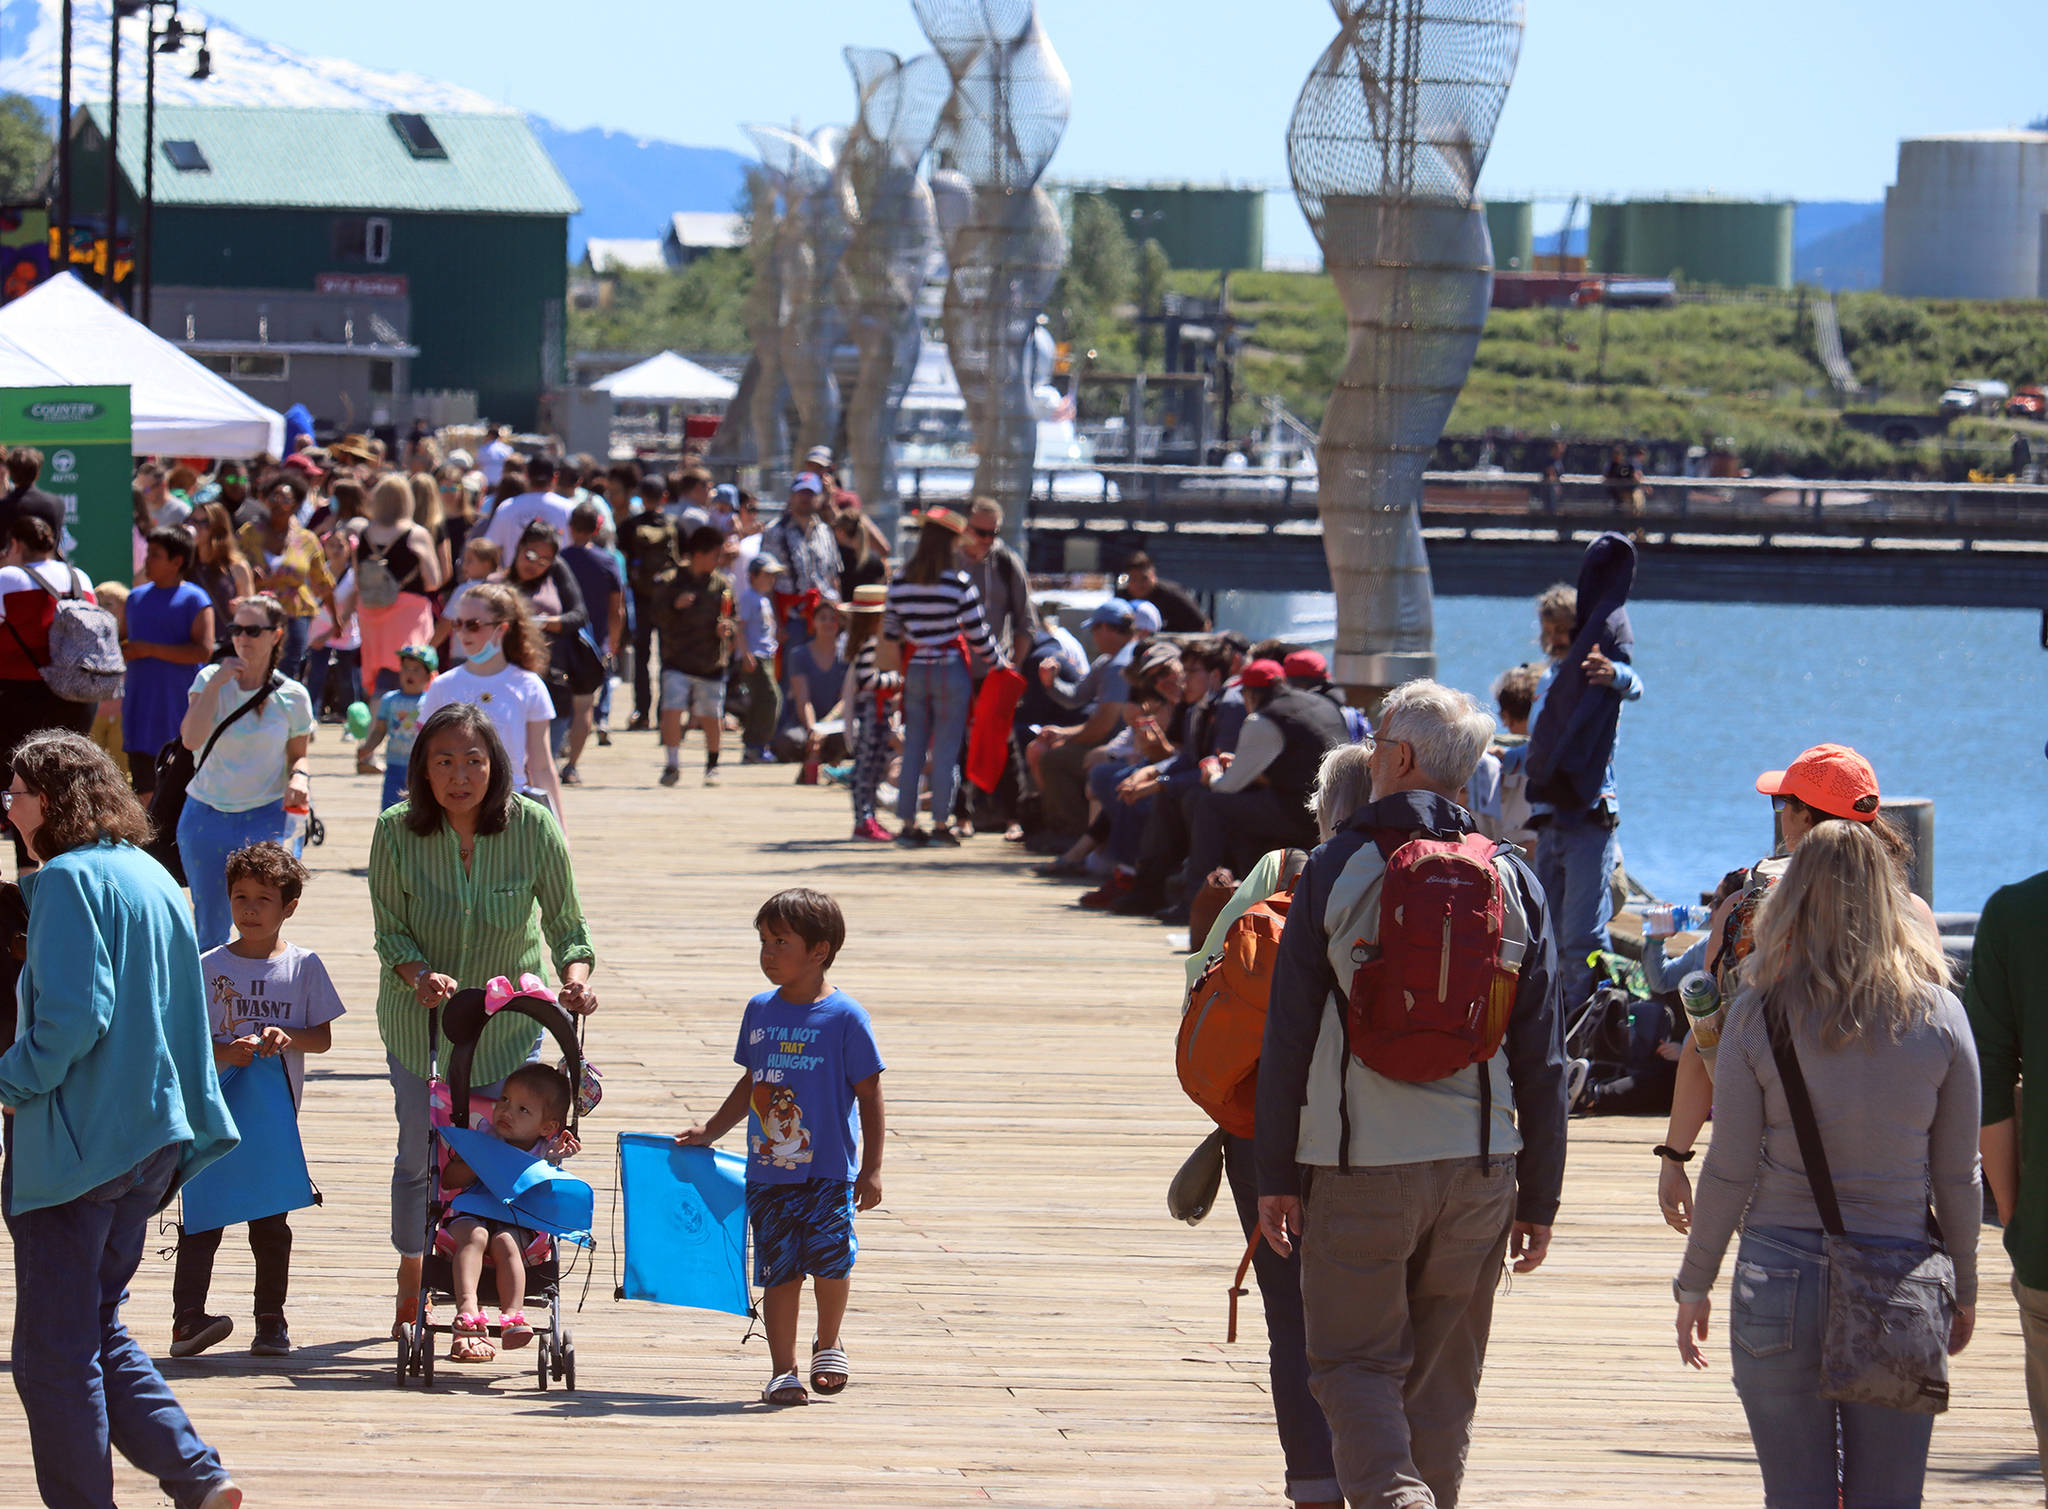 Based on the attendance of past festivals, organizers of the 11th Juneau Maritime Festival estimated over 5,000 people showed up for the event celebrating Juneau’s maritime culture. (Ben Hohenstatt / Juneau Empire)